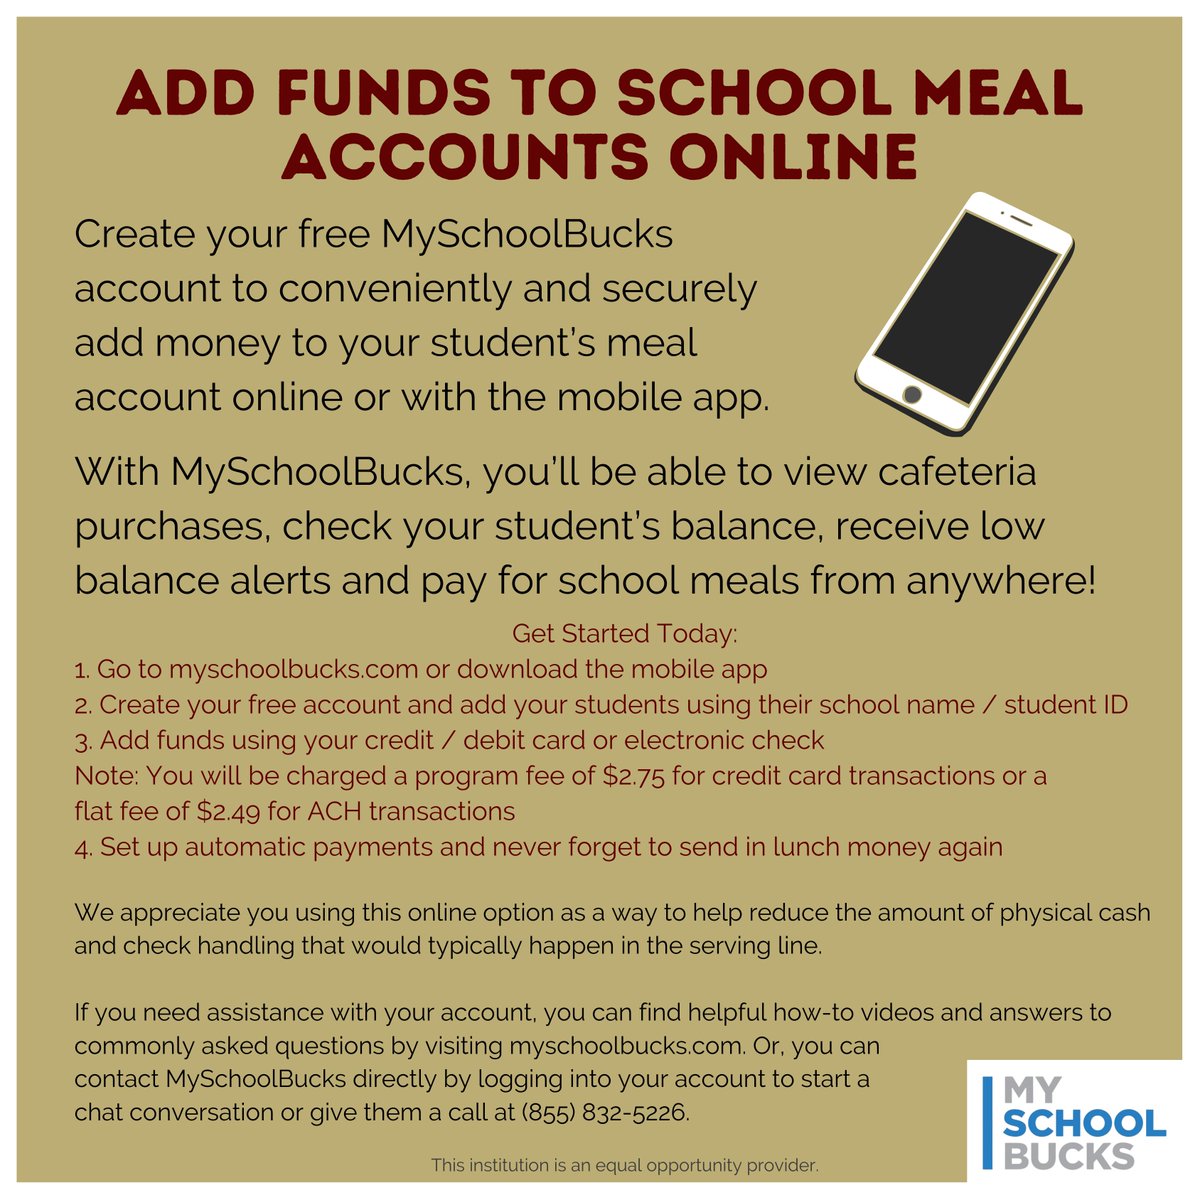 Help your student speed through the lunchline by prepaying online at myschoolbucks.com. Even though #schoolbreakfast and #schoollunches are free this year, we encourage students to still have money on their accounts to purchase a la carte items!